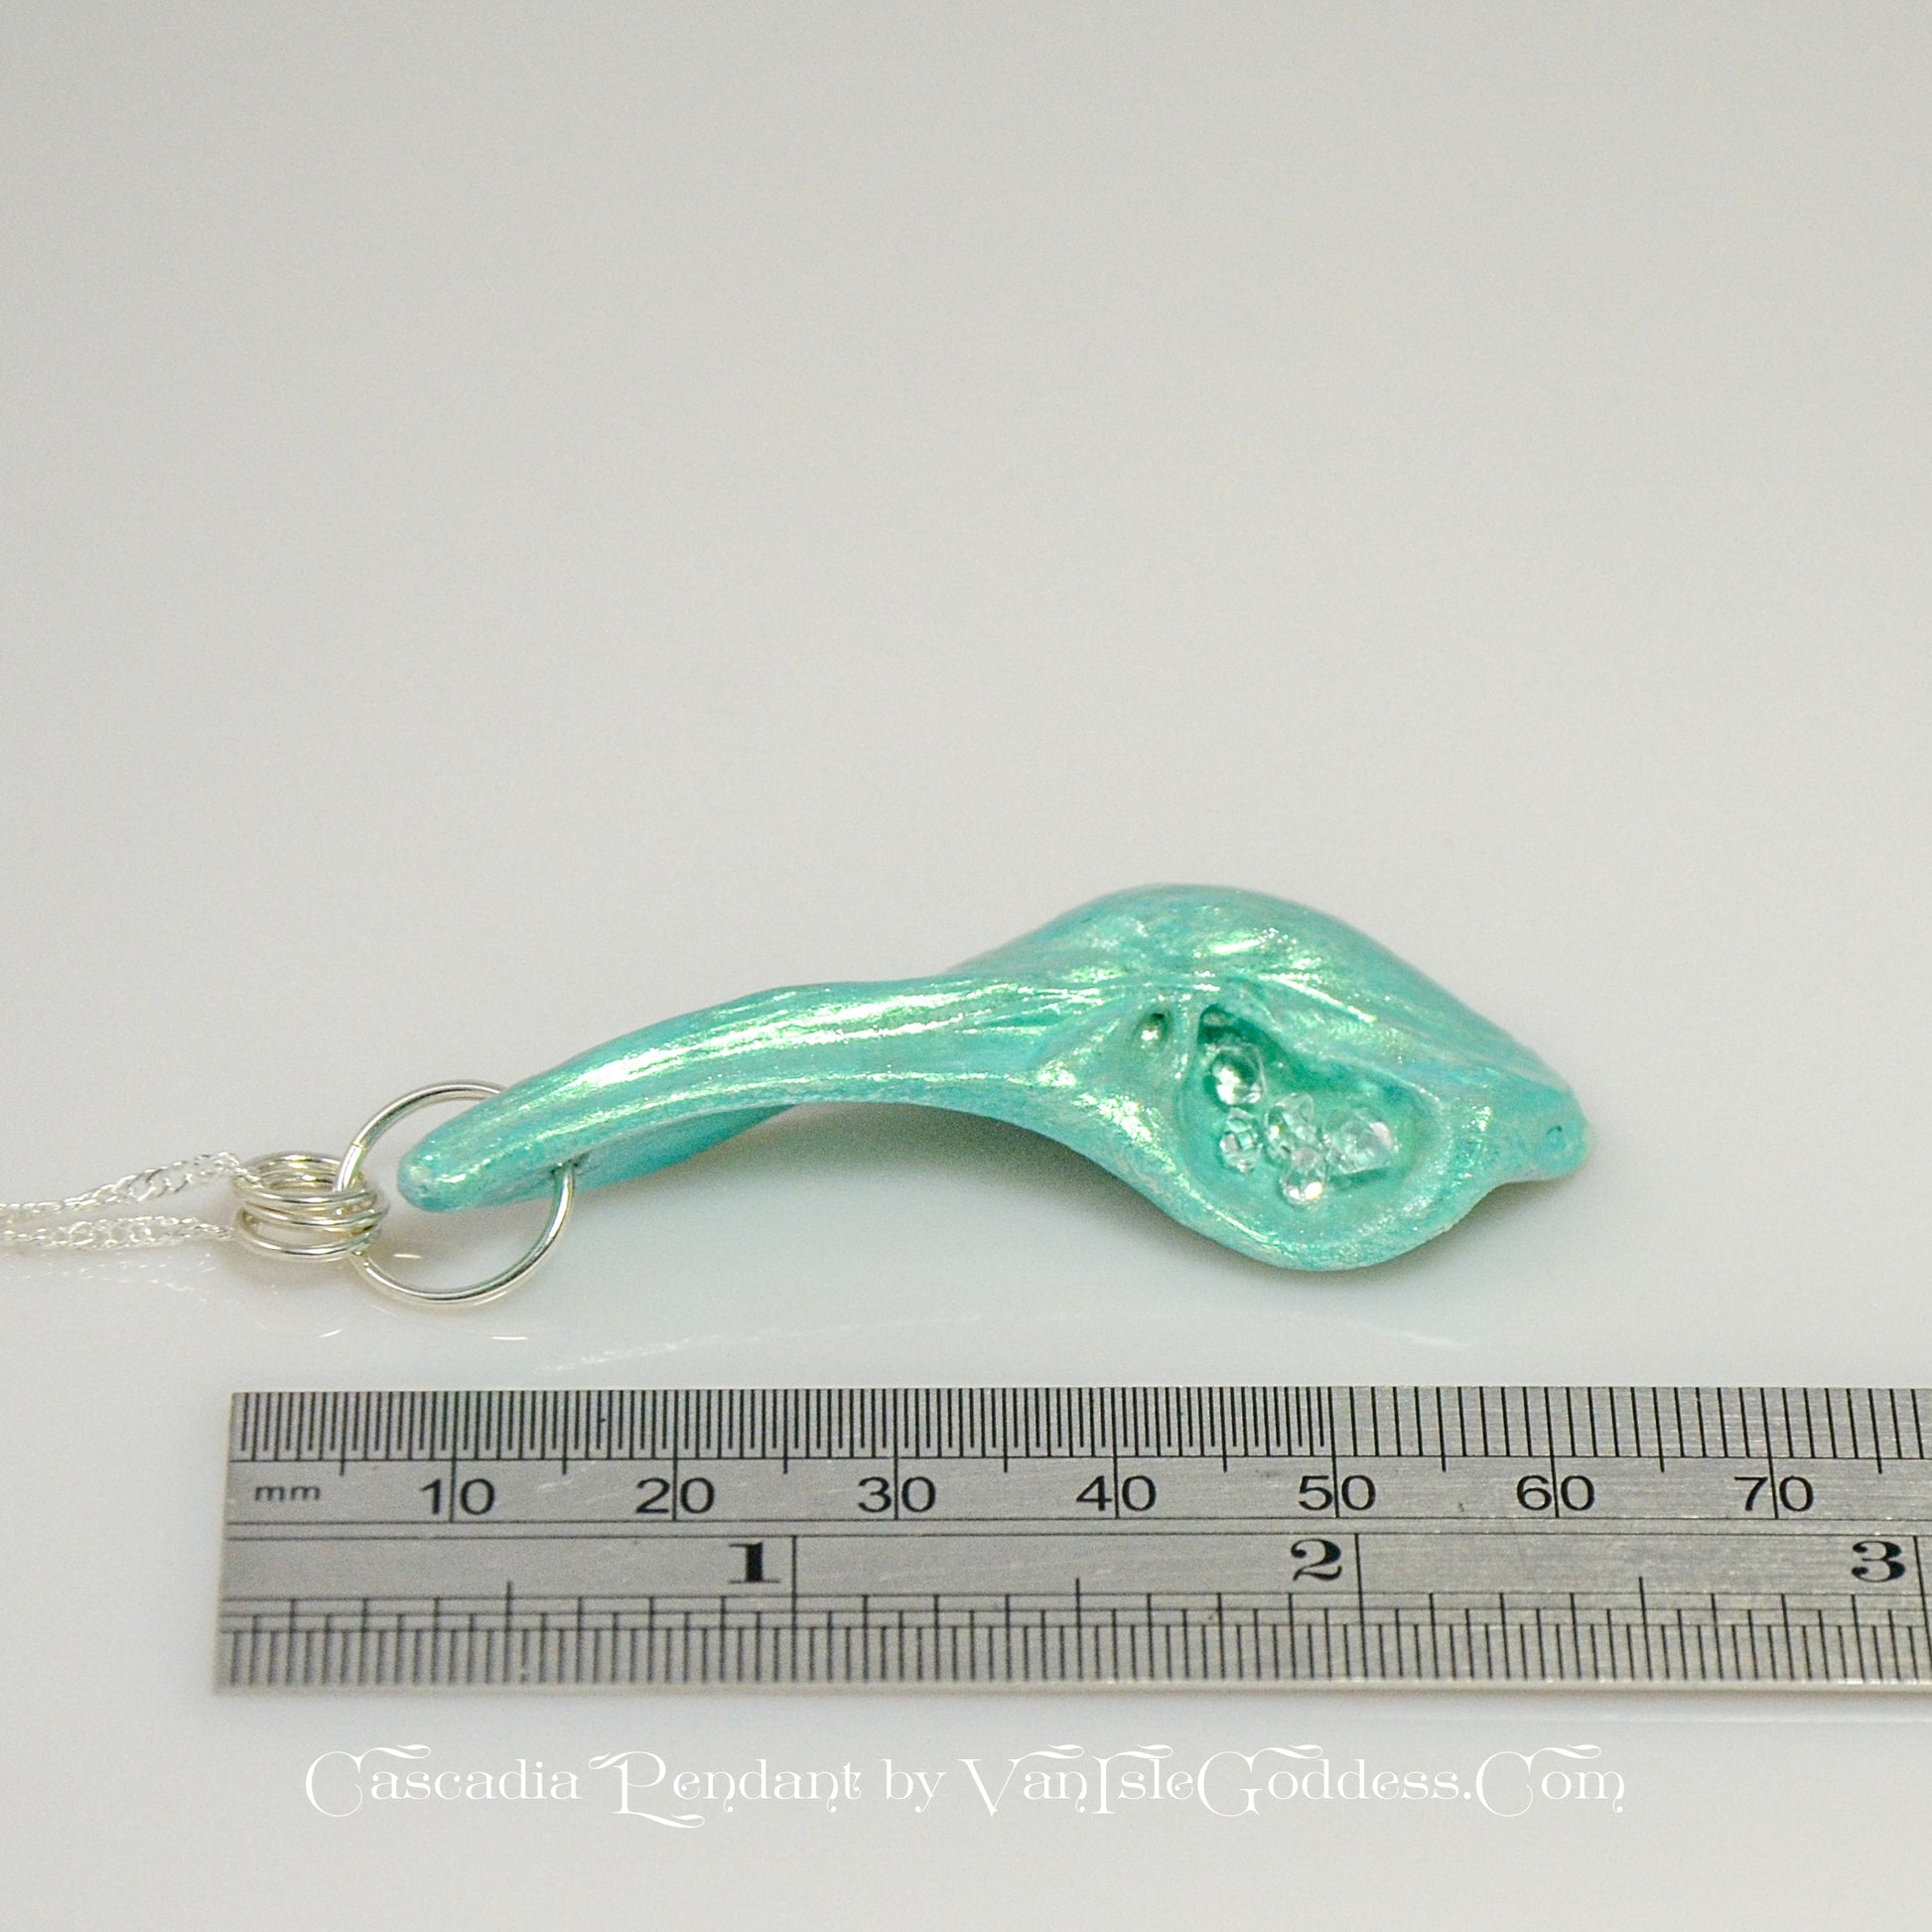 The Cascadia Pendant created with a natural seashell from the beaches of Vancouver Island.  The seashell is turquoise and has high quality herkimer diamonds. The pendant is shown on its side with a ruler so the view can see the length of the pendant. The print on the bottom of the image says: Cascadia Pendant by Van Isle Goddess dot com